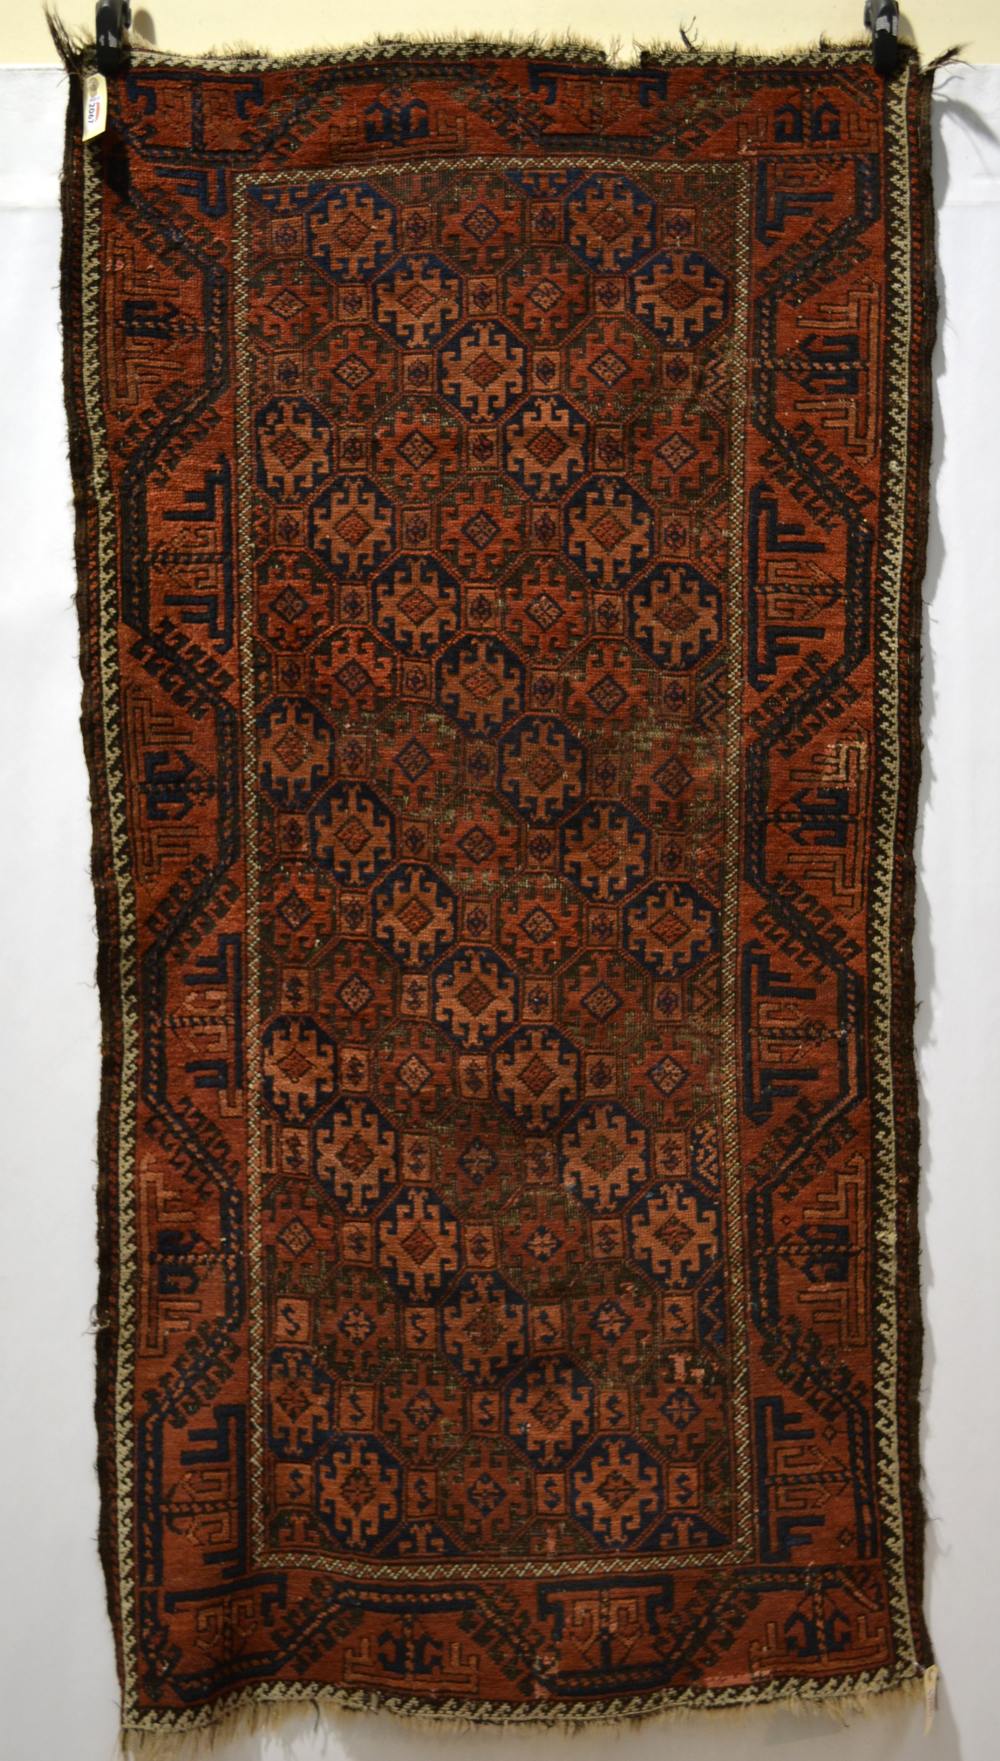 Baluchi rug, Mashad region, Khorasan, north east Persia, about 1930, 5ft. 11in. x 2ft. 11in. 1.